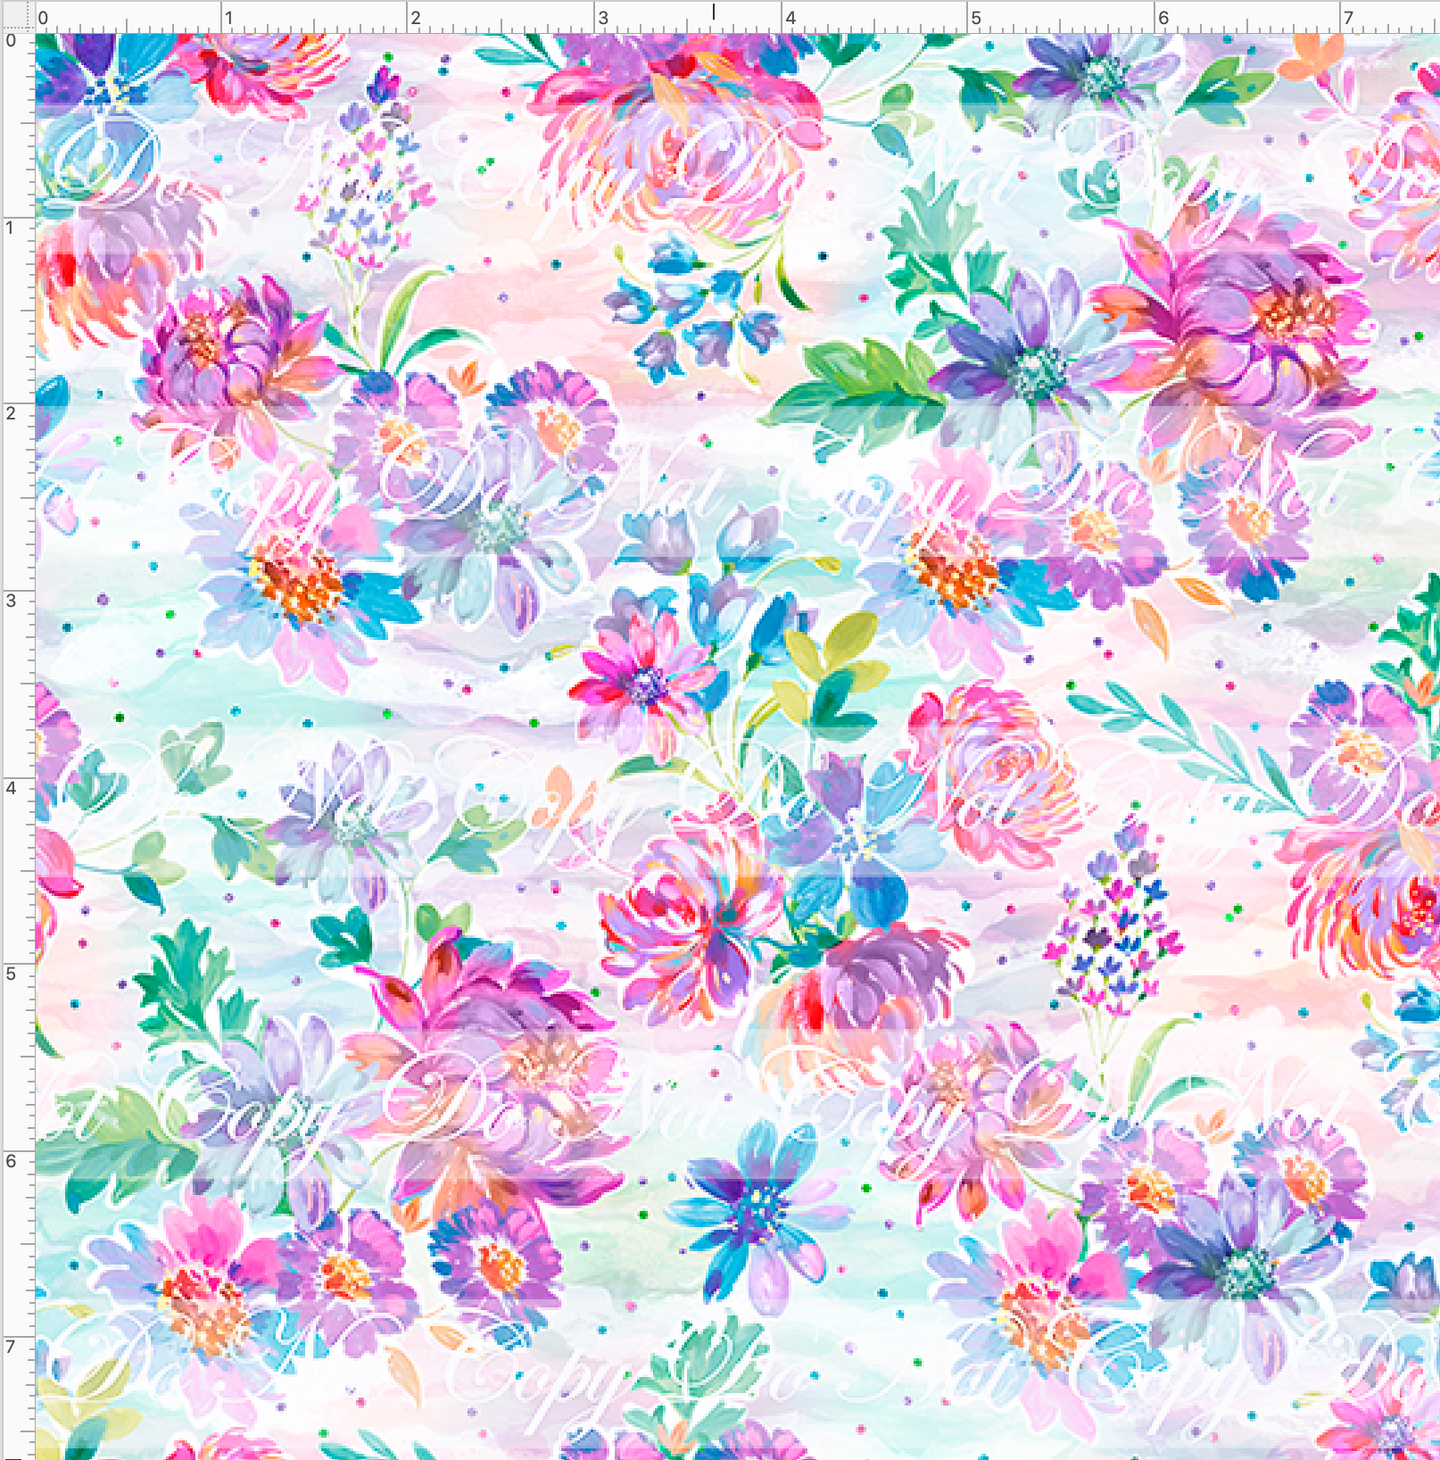 CATALOG - PREORDER R47 - Woodlands - Floral - SMALL SCALE